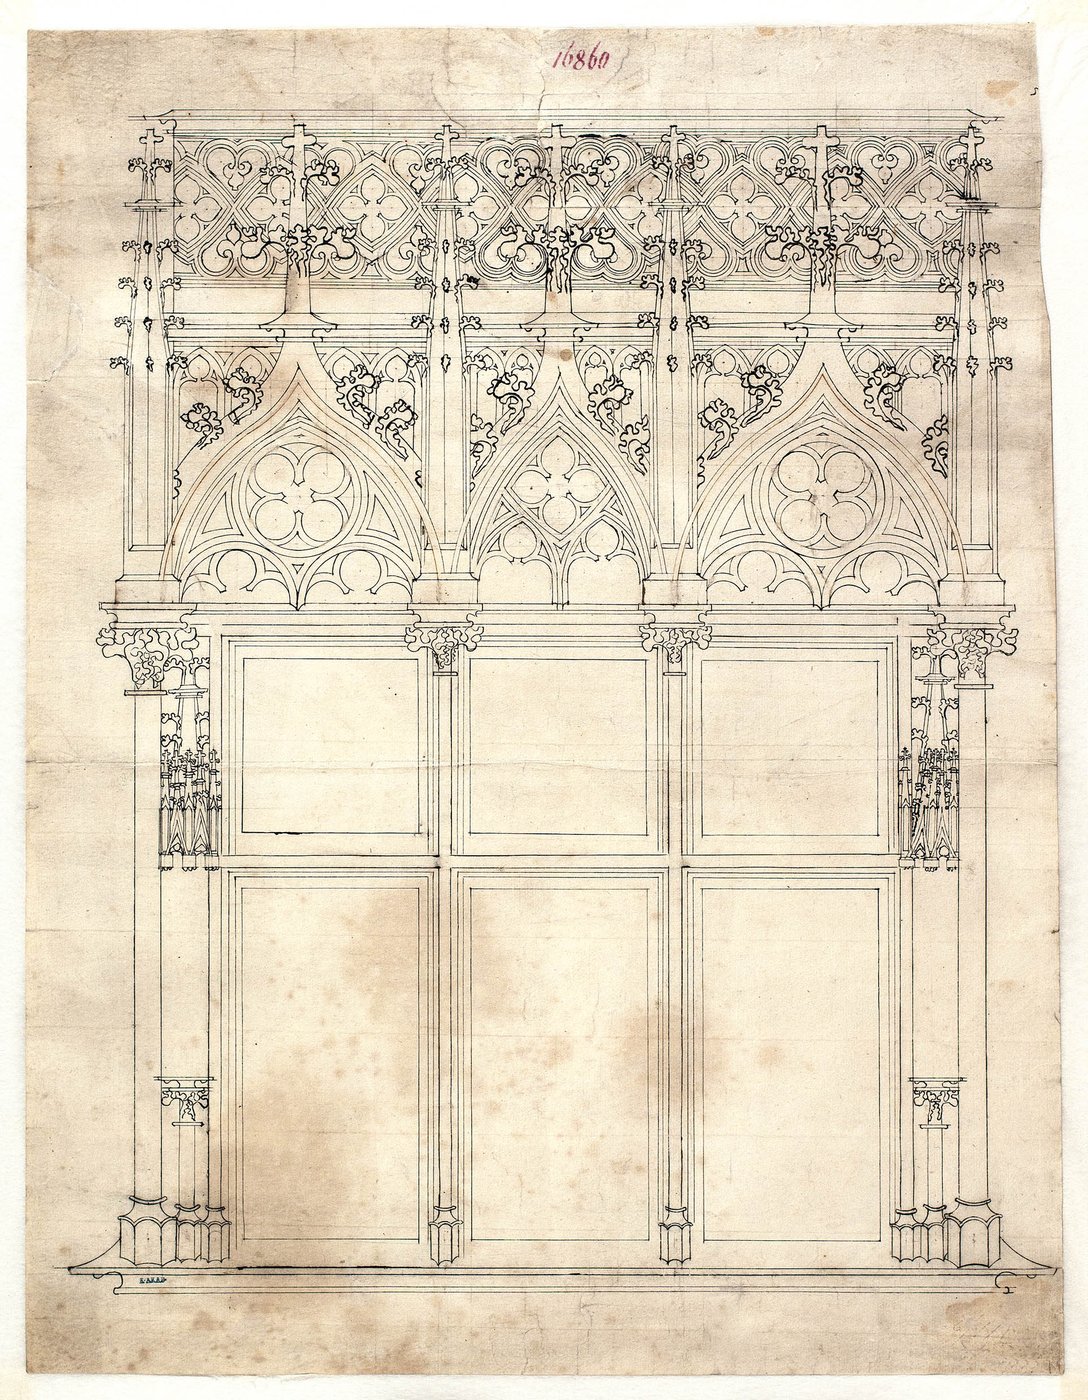 The drawing shows a design for a three-part window bay for the Vienna City Hall with Gothic tracery.